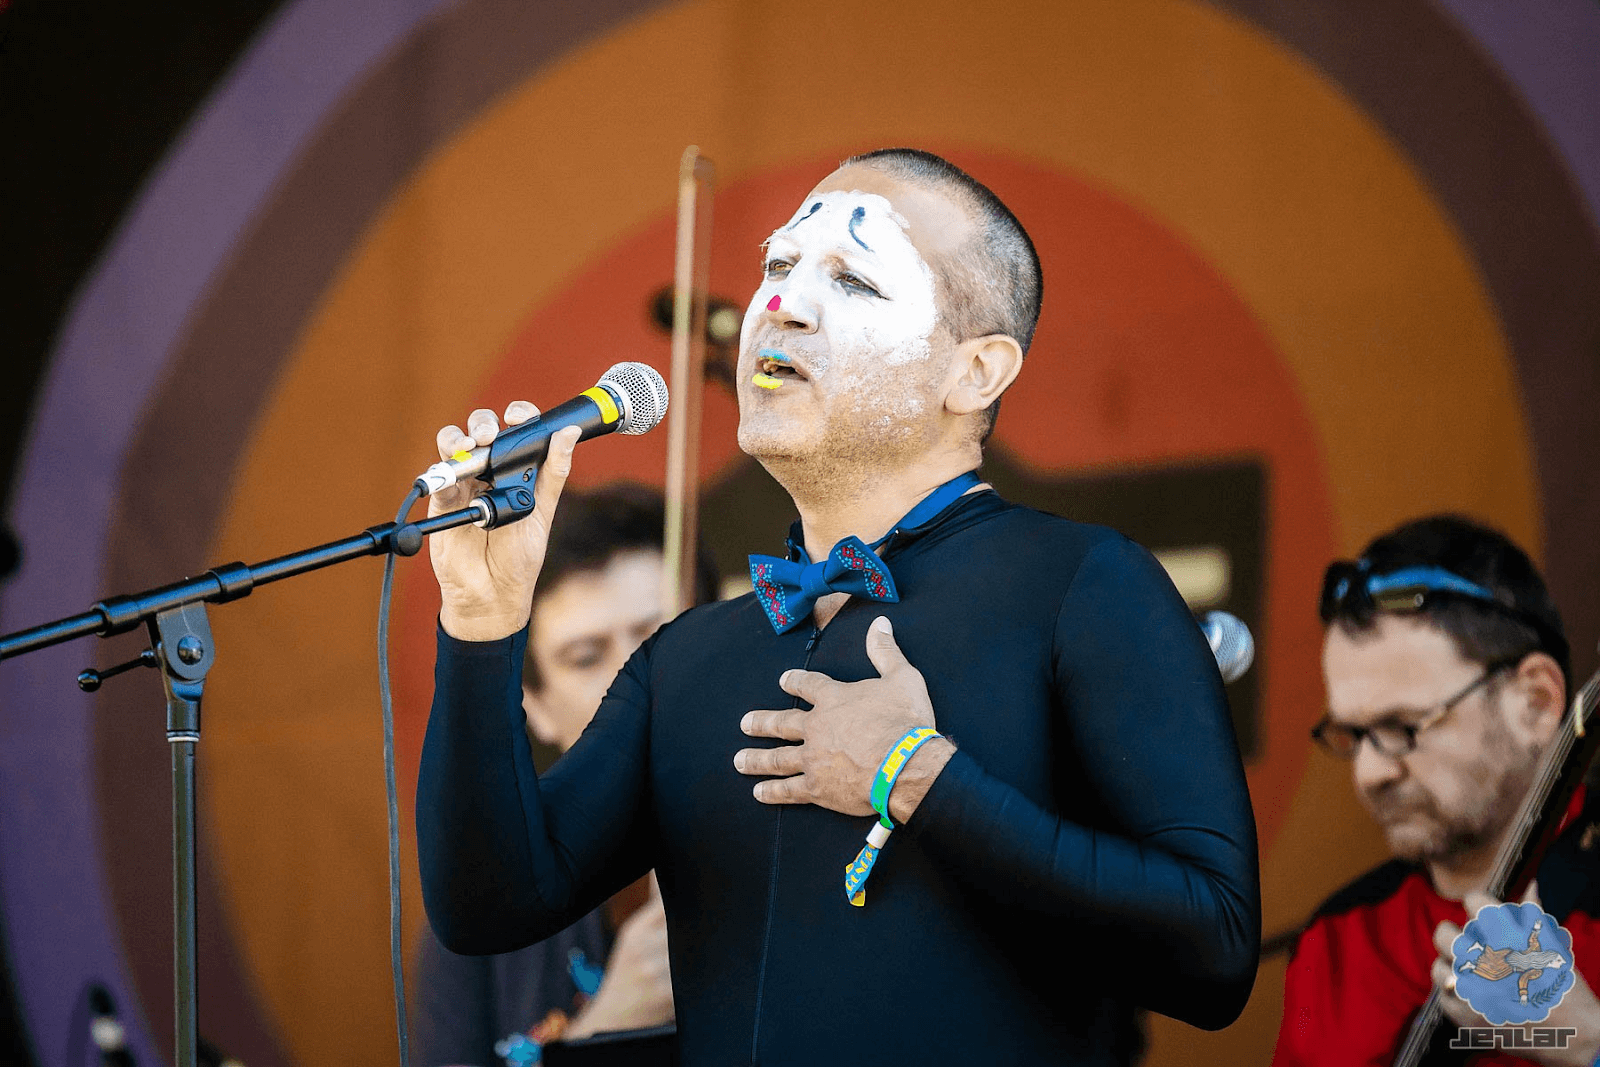 The singer Daniil Cherkasskiy performing while dressed as a mime, with his lips painted the color of the Ukrainian flag.